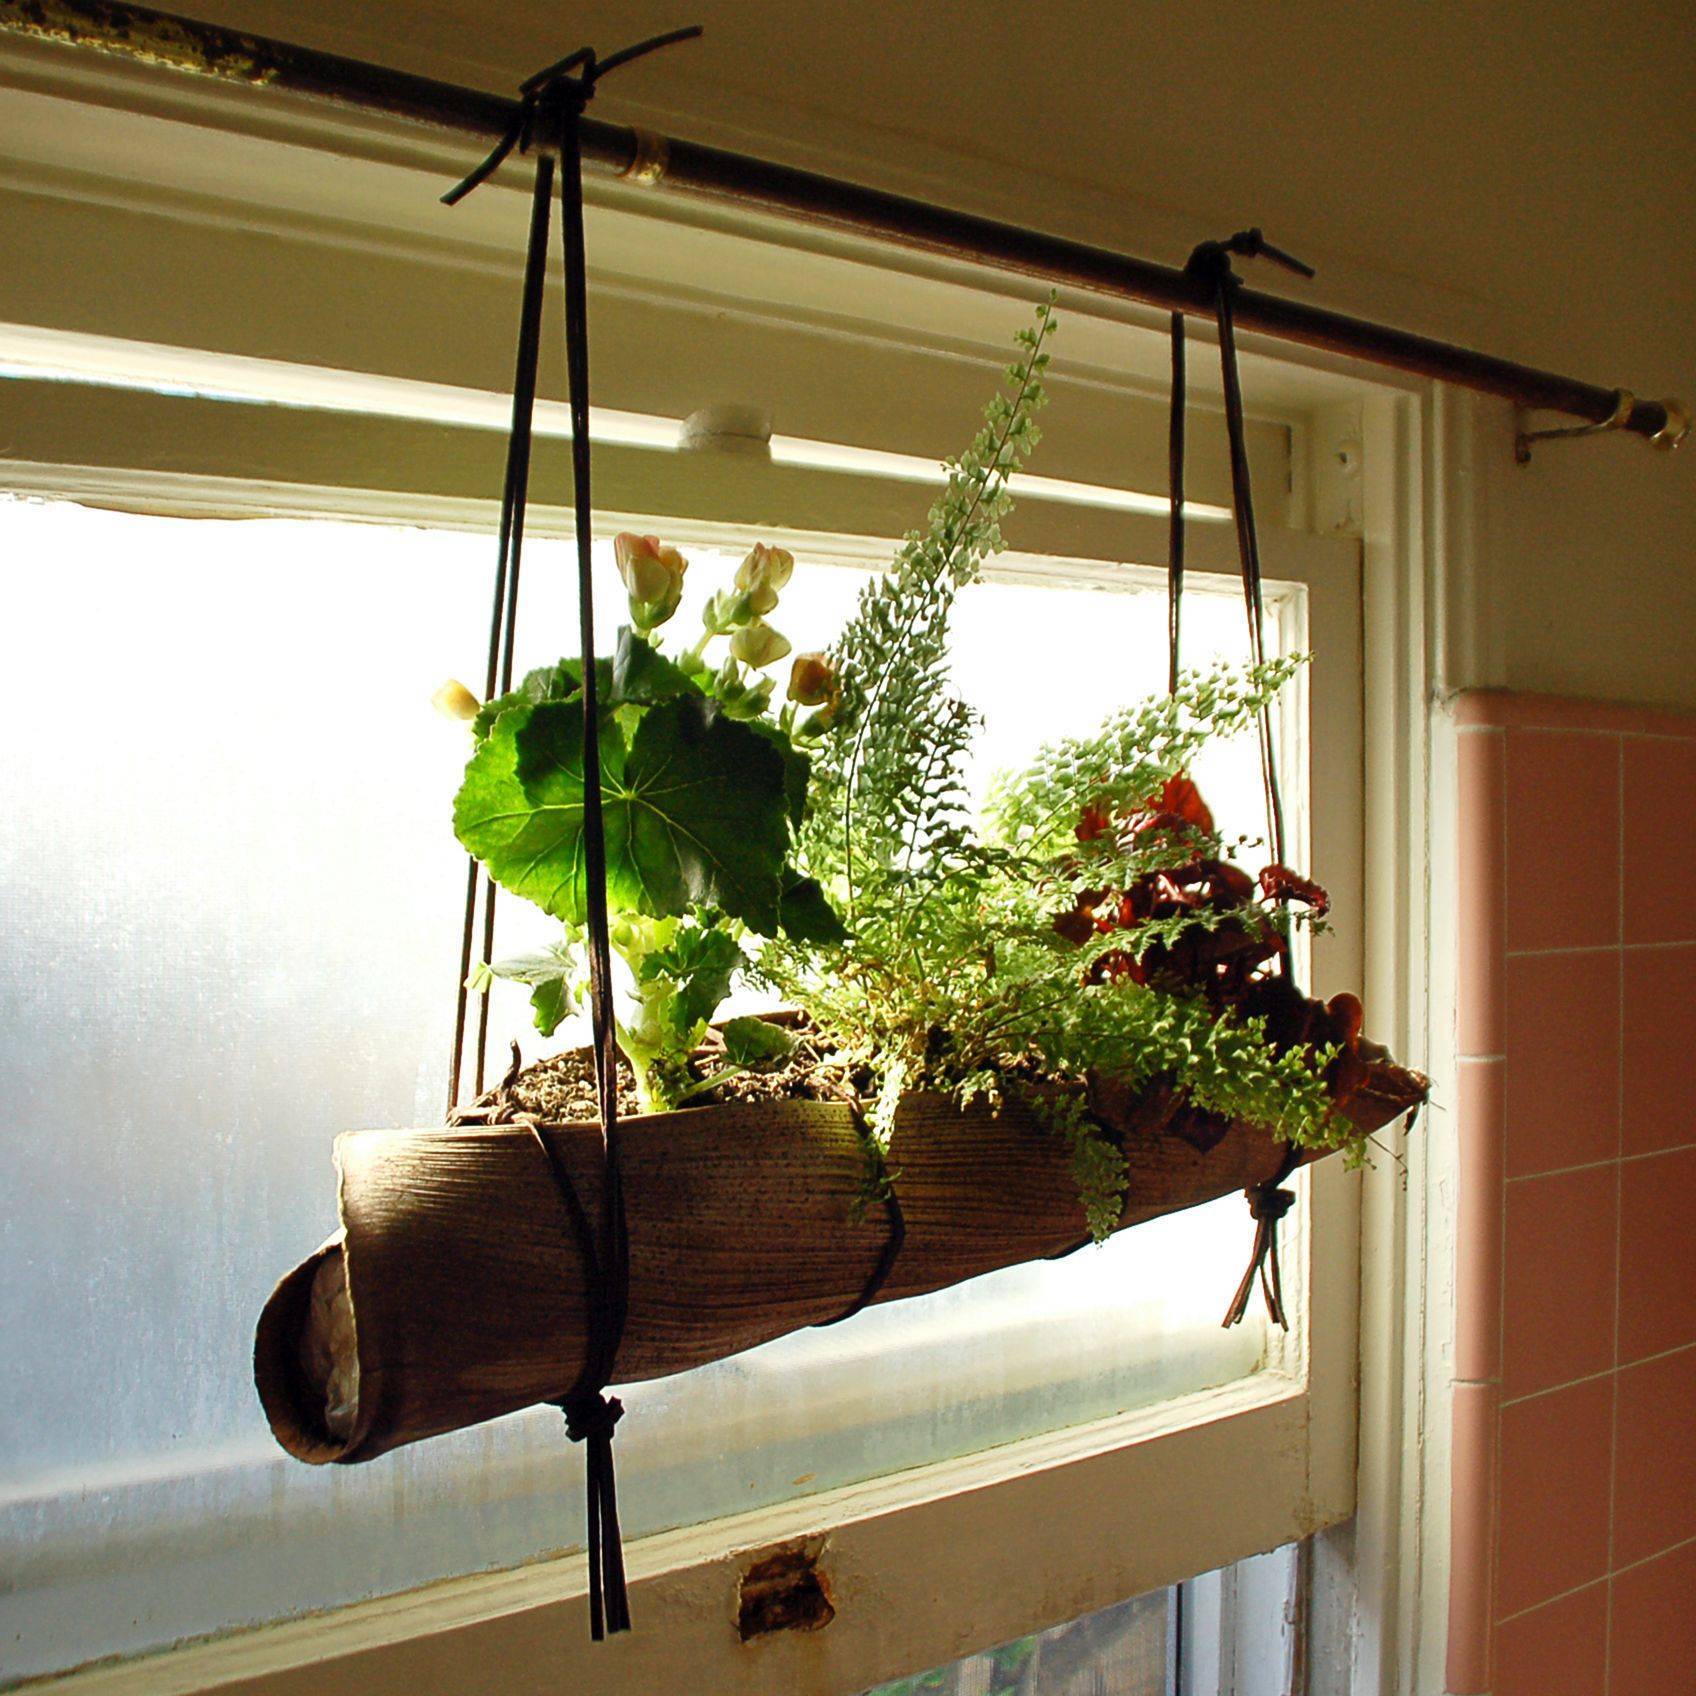 Hanging planter wrapped in burlap